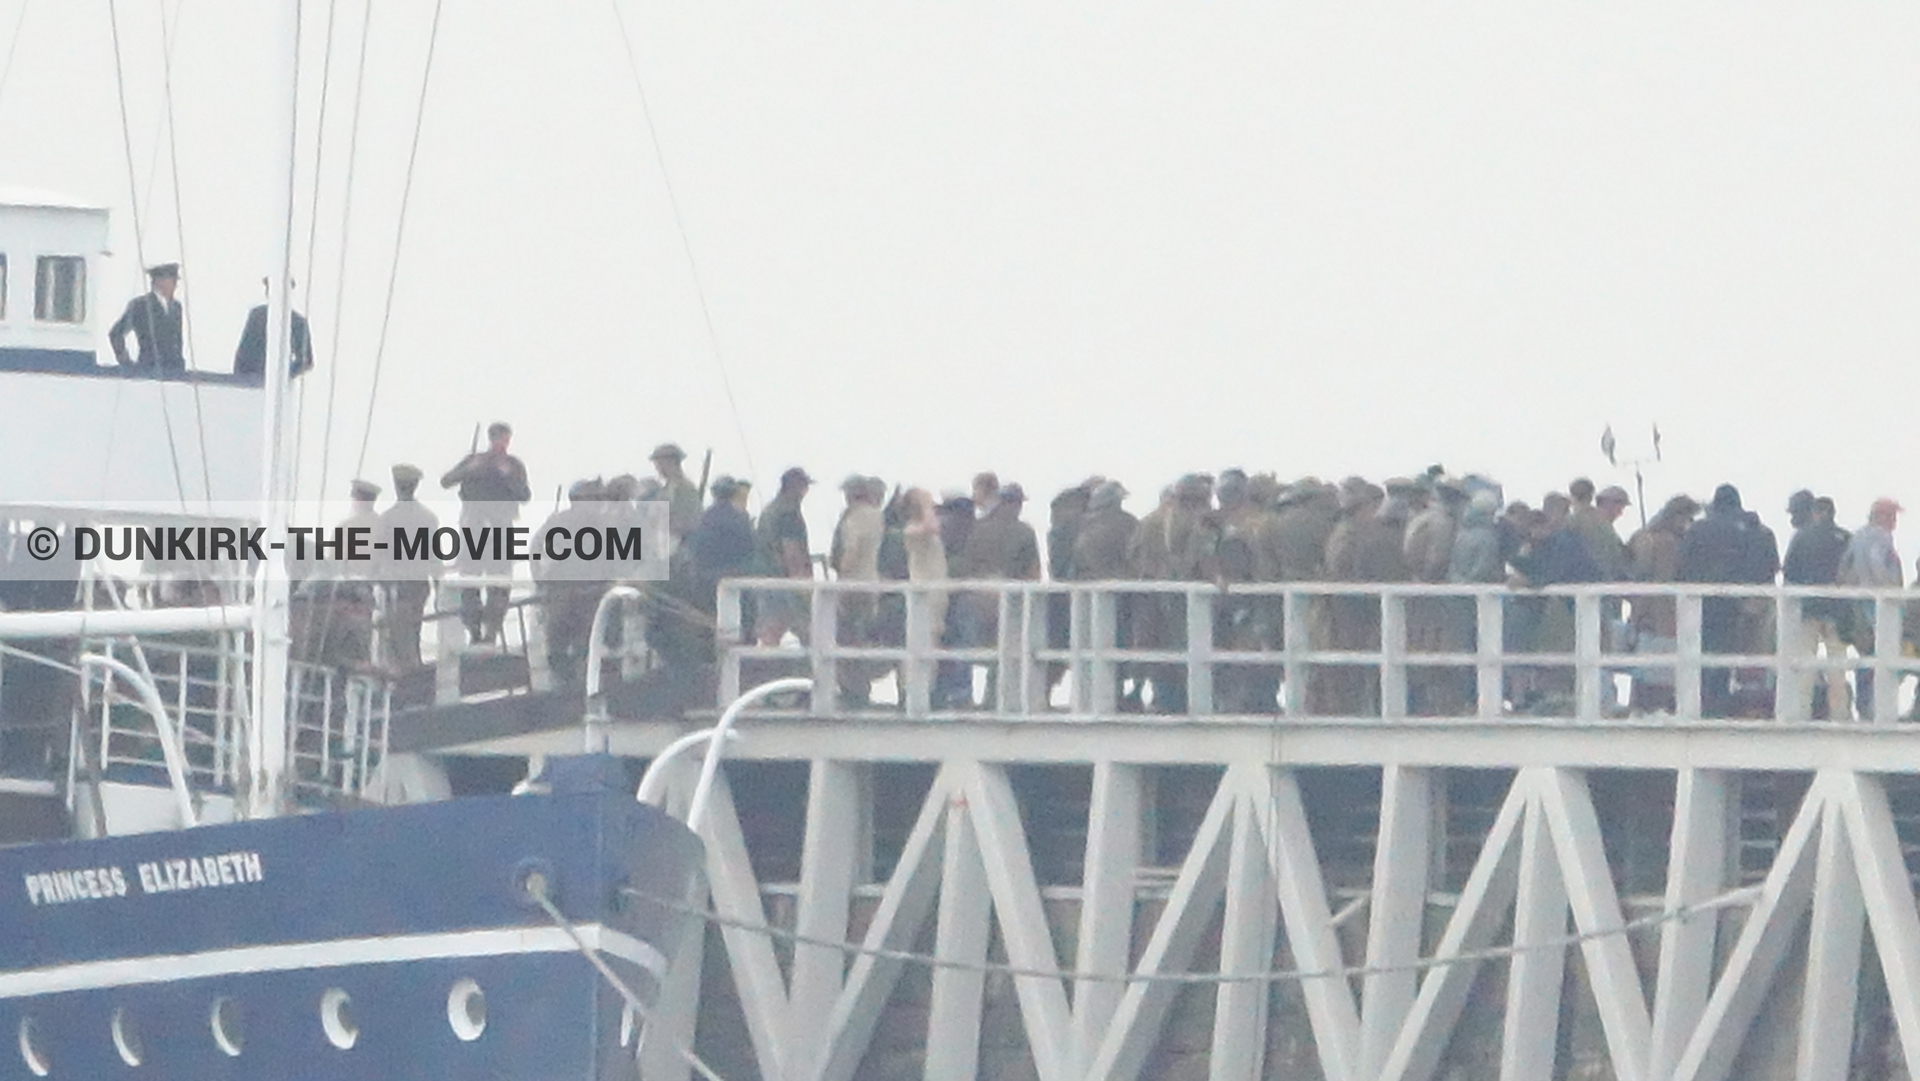 Picture with supernumeraries, EST pier, Princess Elizabeth,  from behind the scene of the Dunkirk movie by Nolan